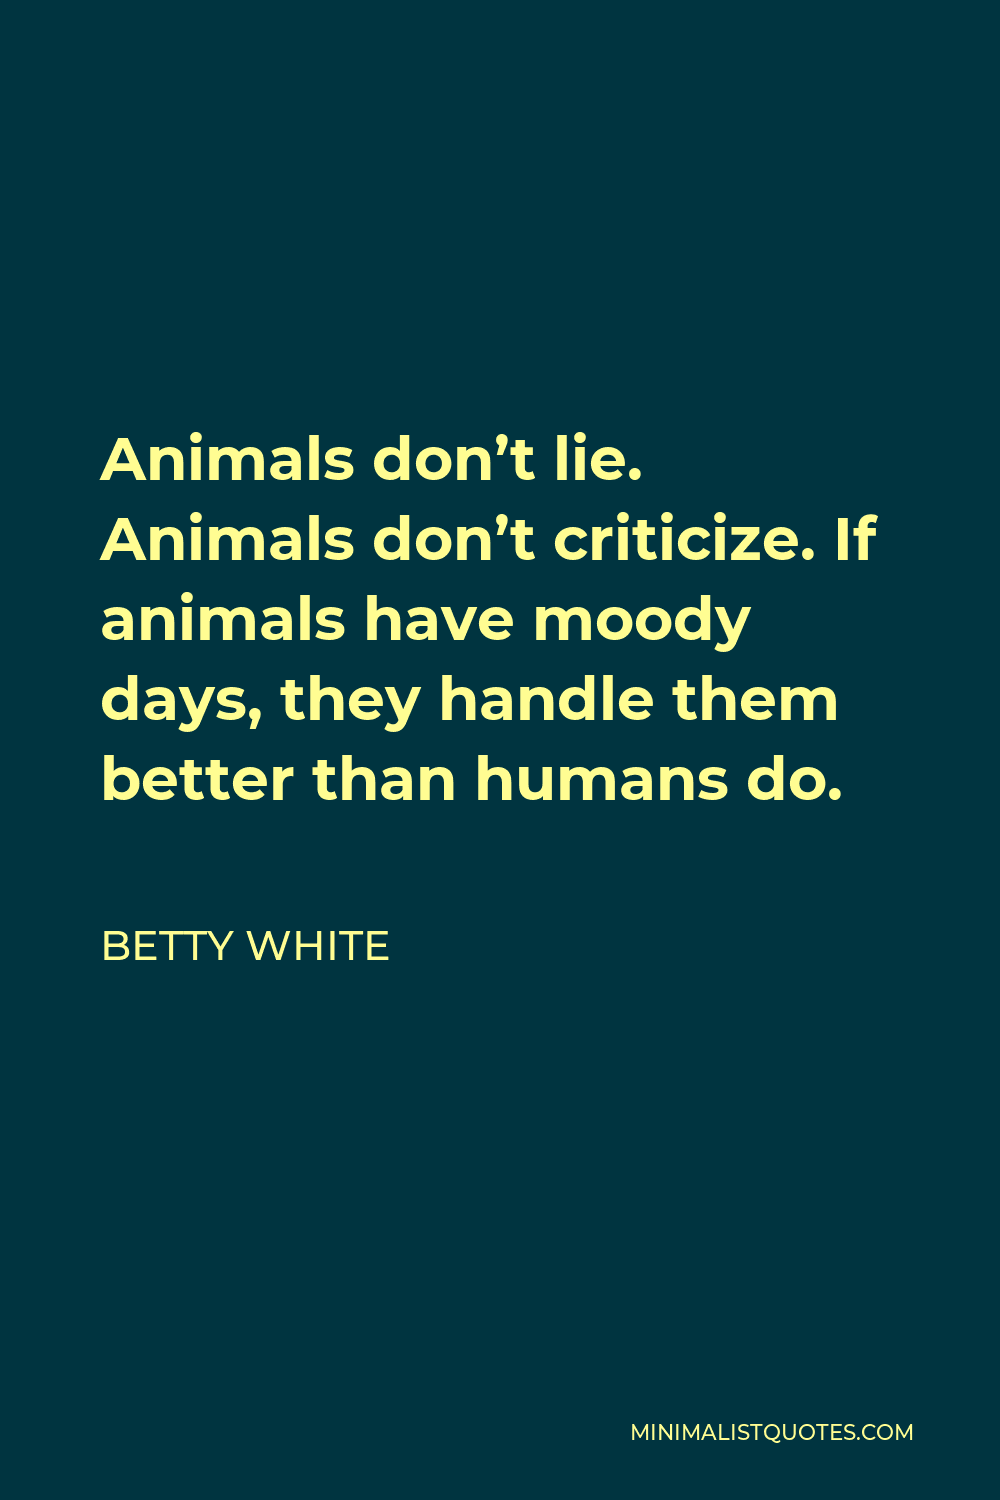 Betty White Quote - Animals don’t lie. Animals don’t criticize. If animals have moody days, they handle them better than humans do.